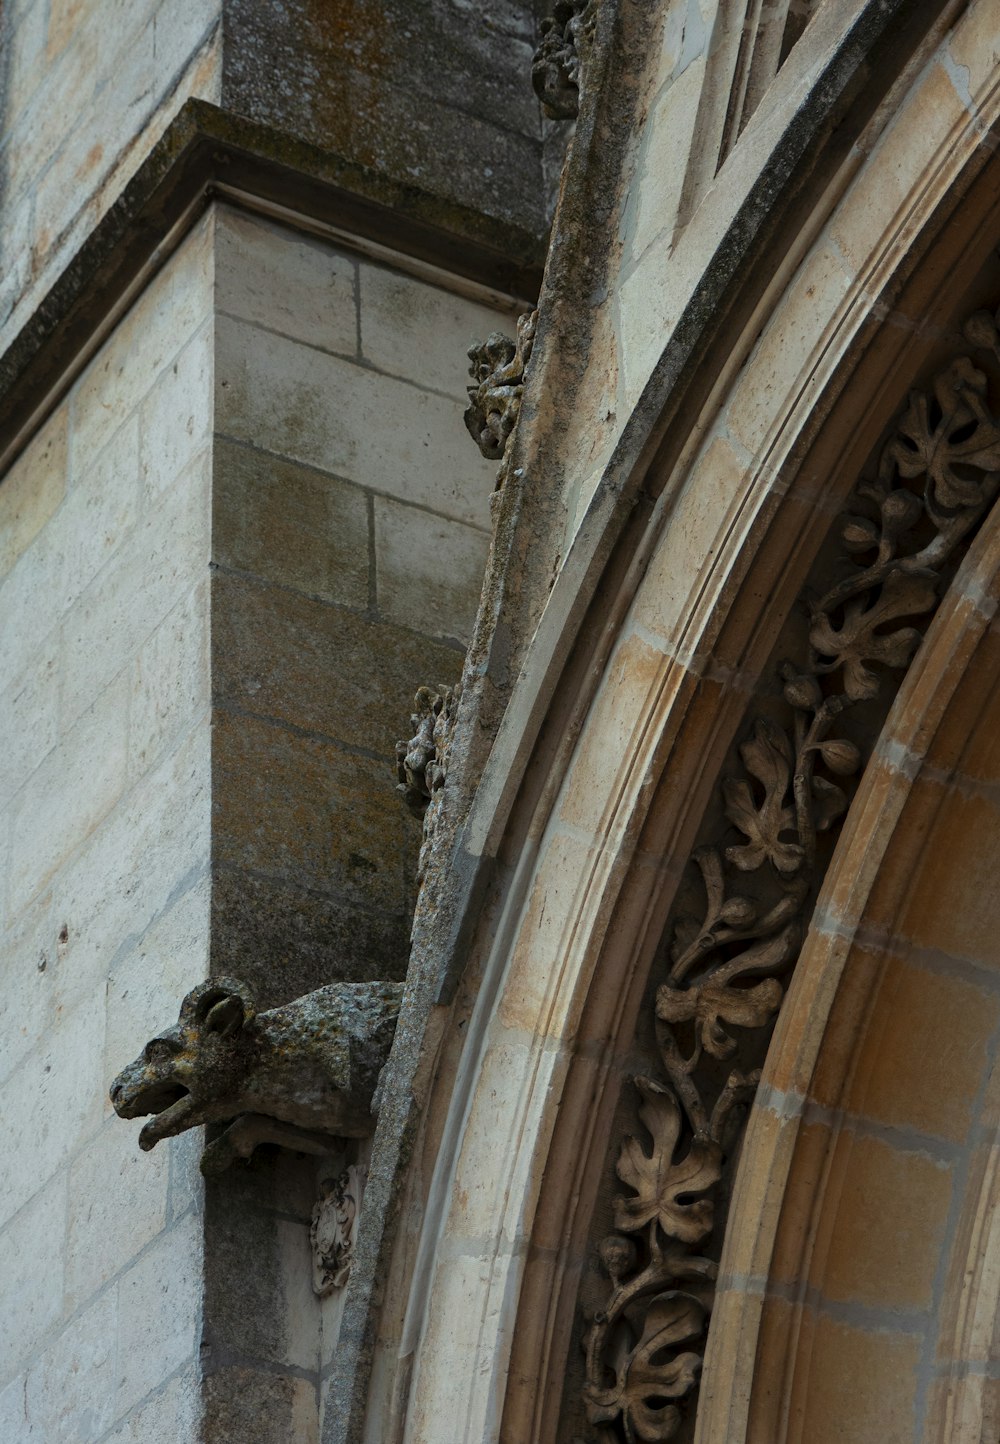 a close up of a stone building with a gargoyle on it